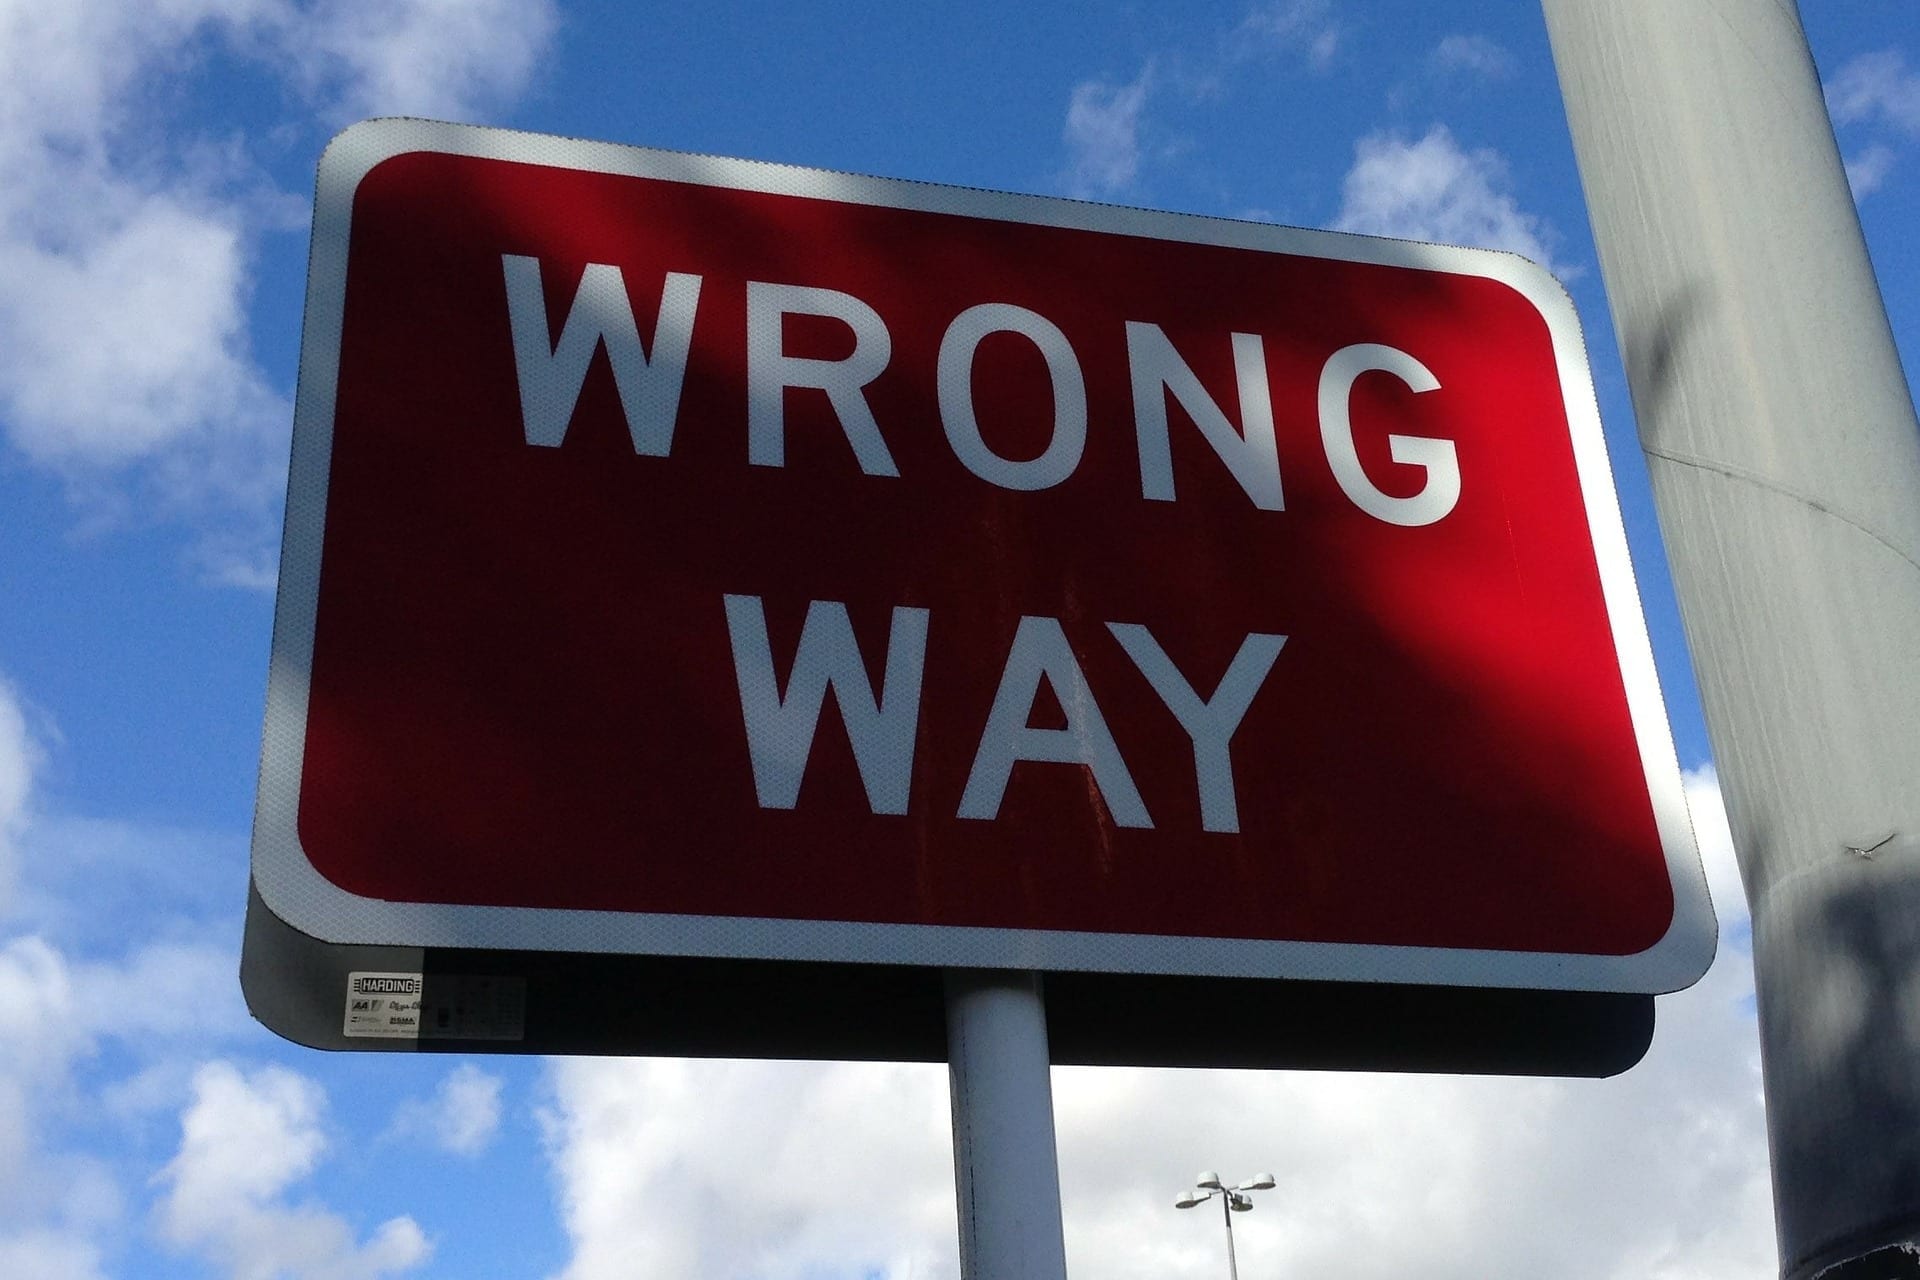 misconceptions about software testing represented by wrong way sign